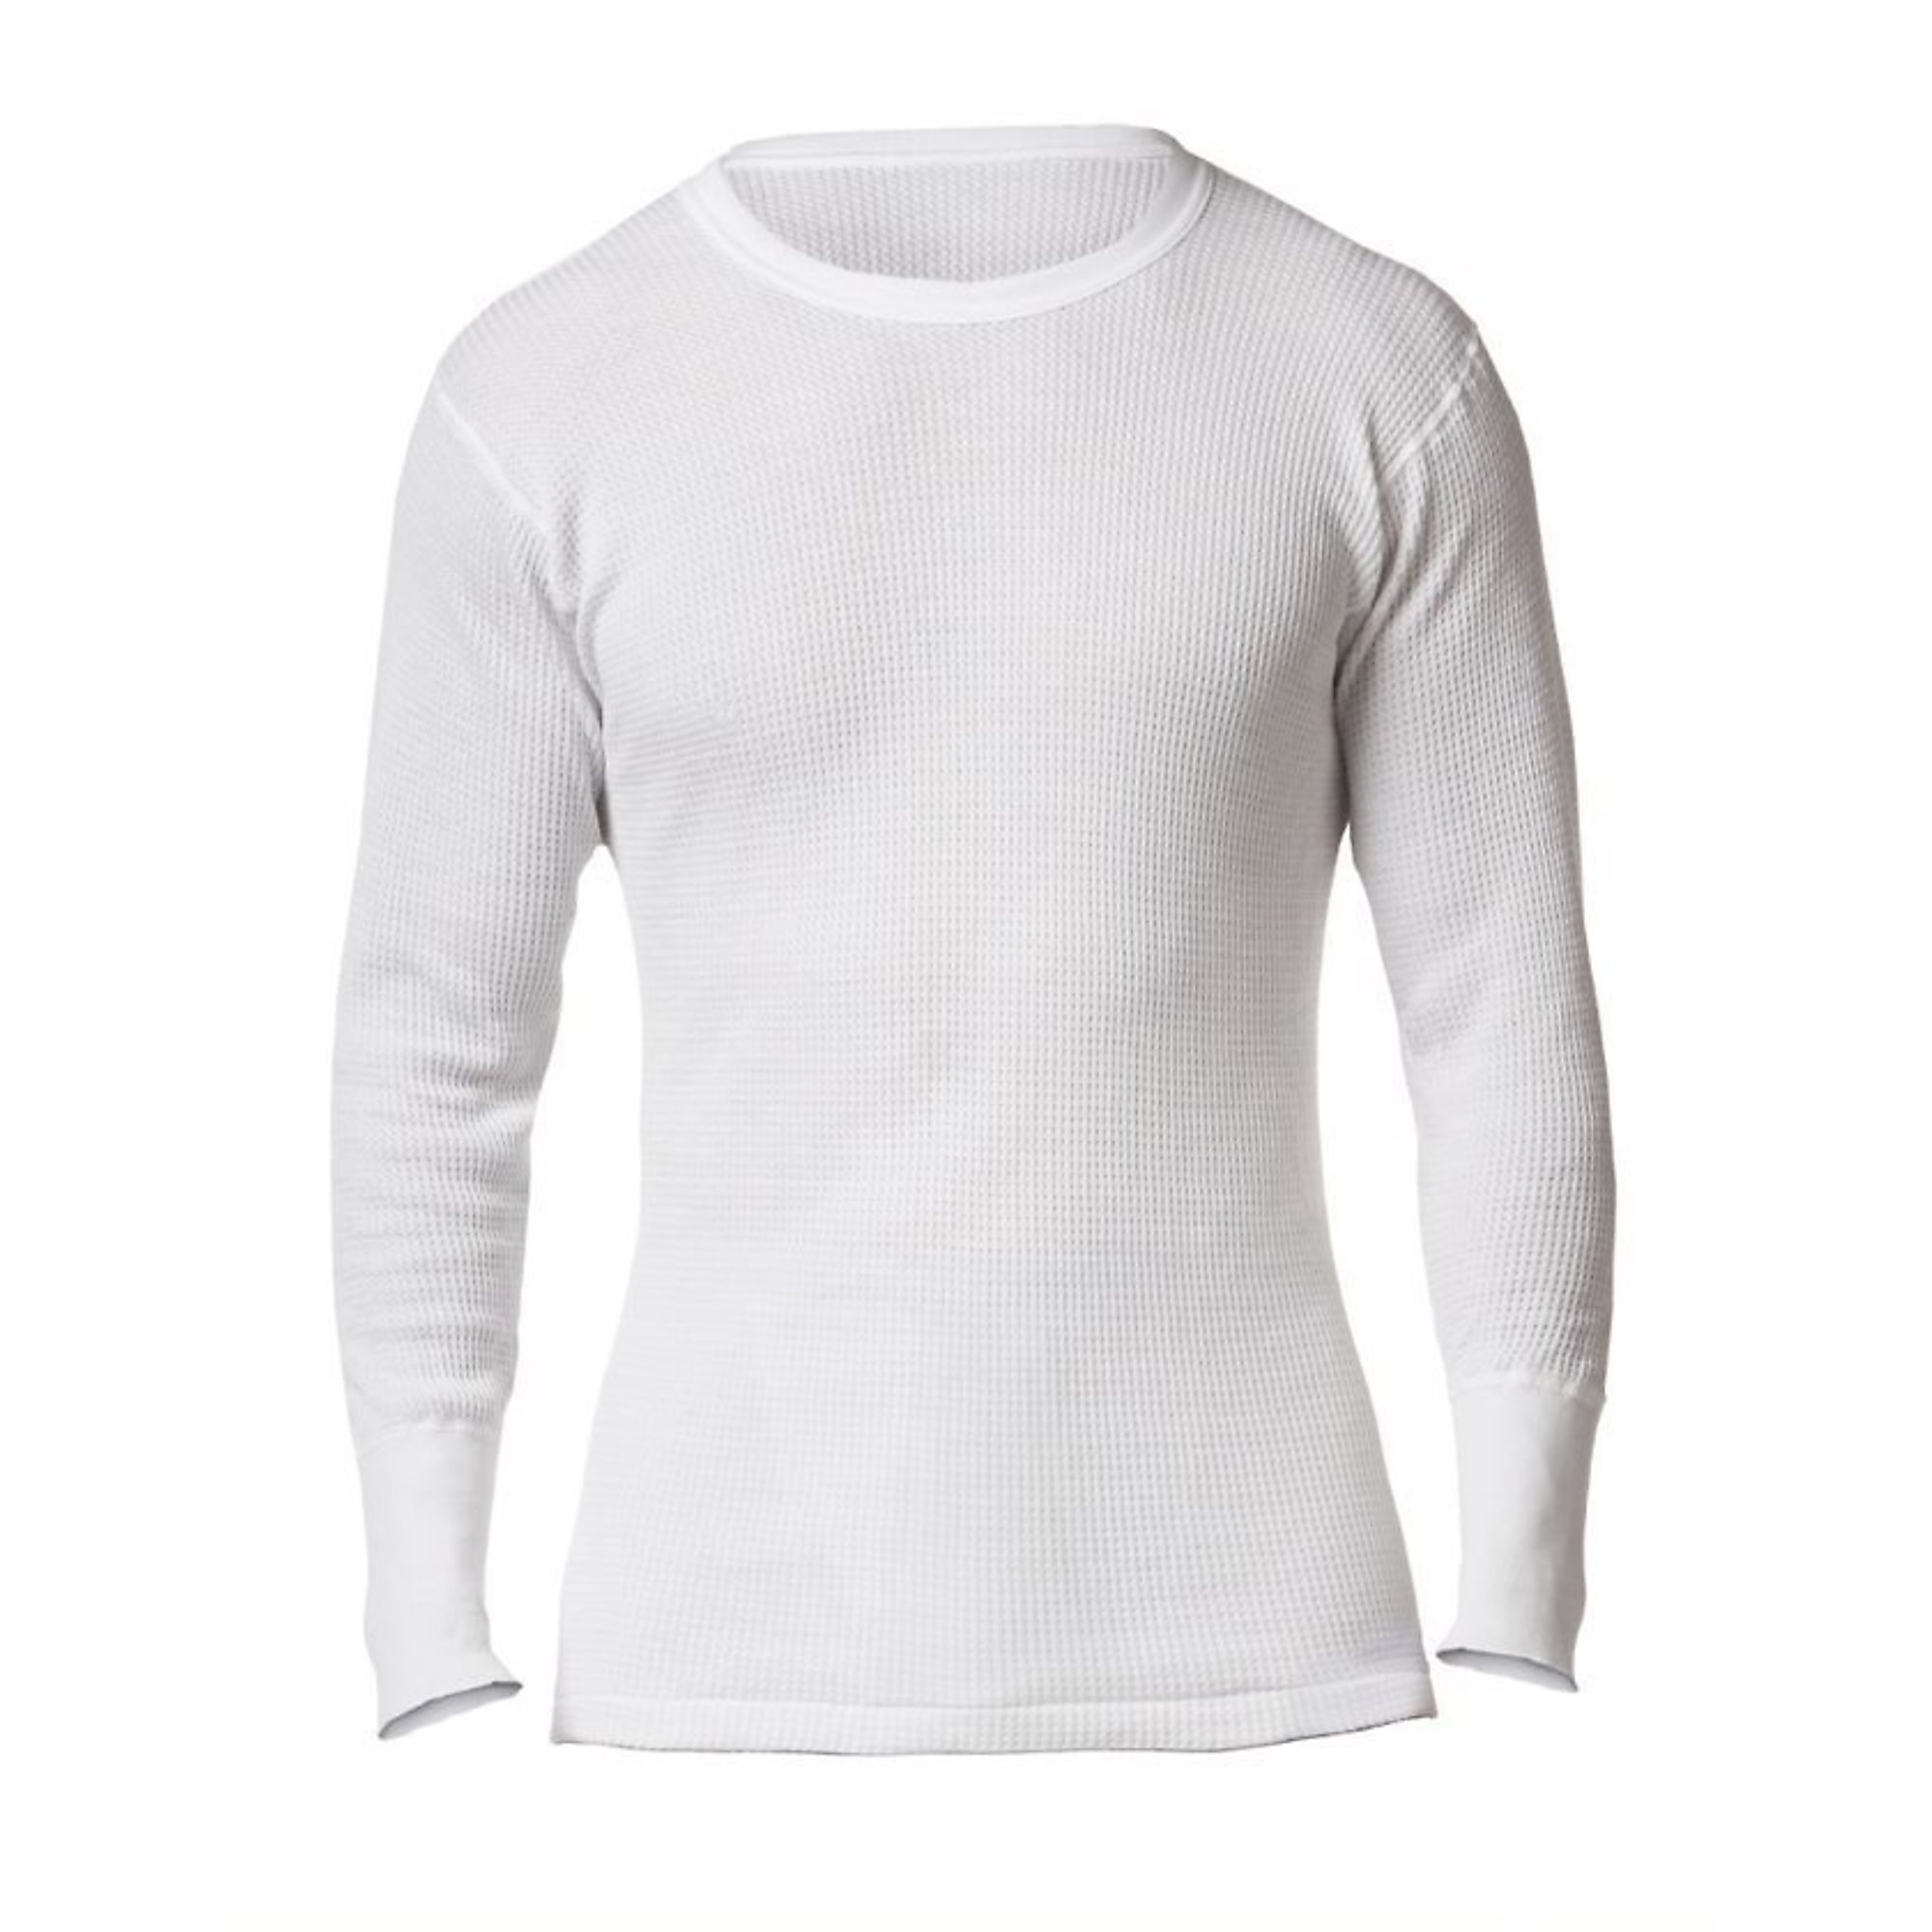 Stanfield's Men's Thermal Waffle Knit Long Sleeve Base Layer Shirt